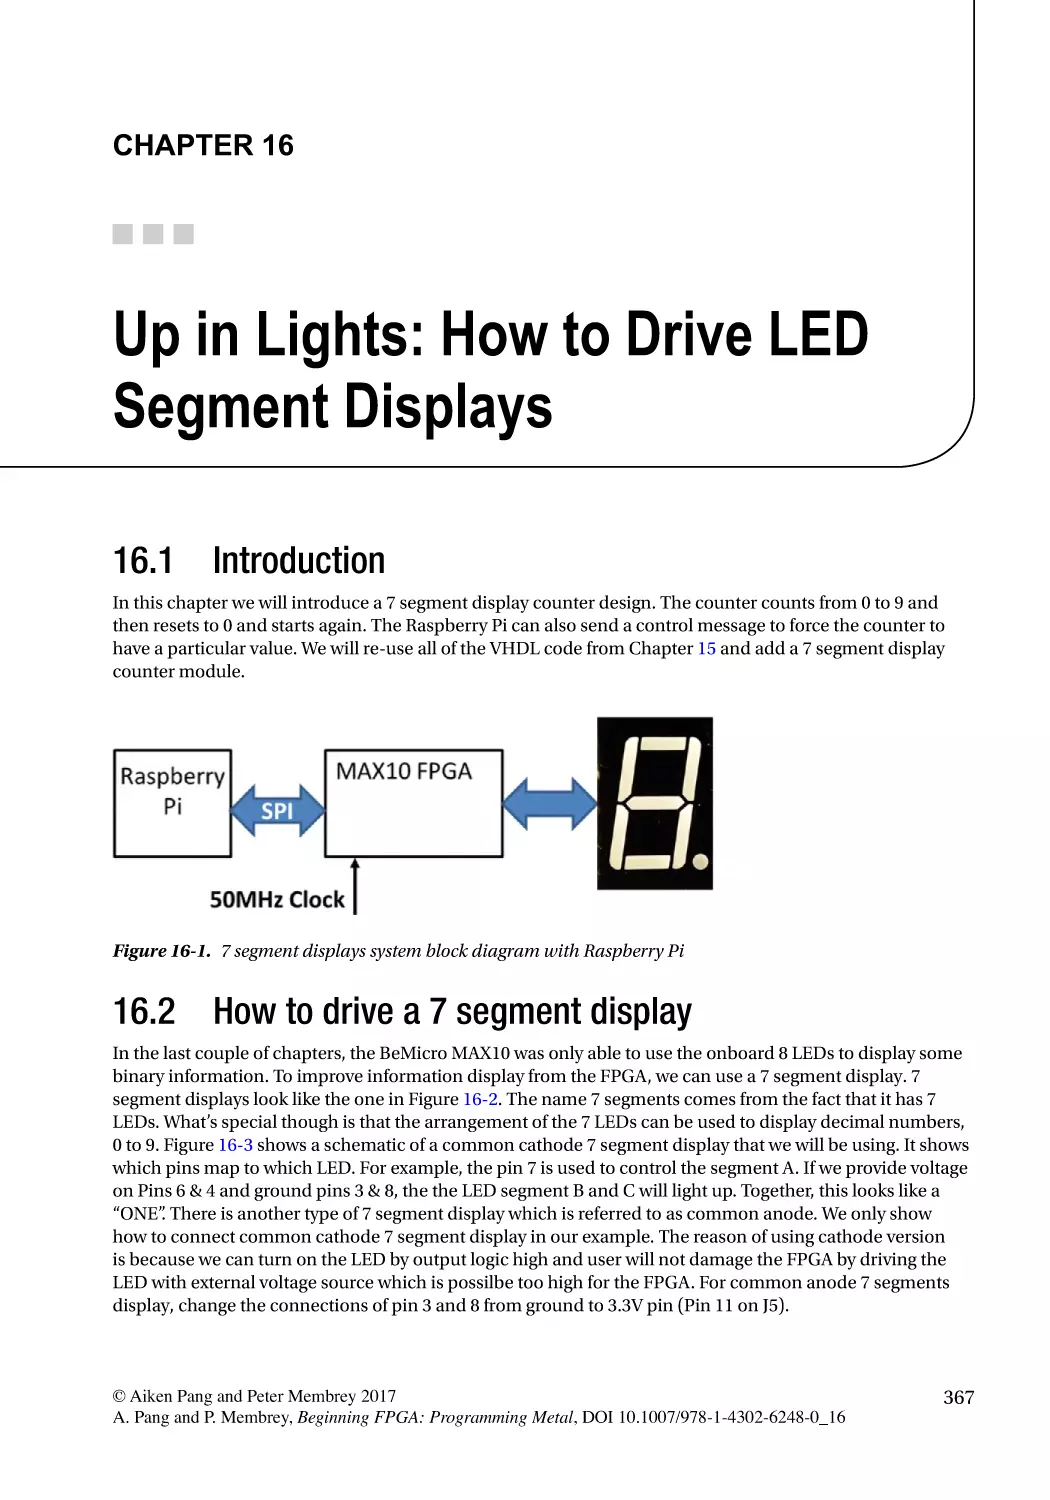 Chapter 16
16.1 Introduction
16.2 How to drive a 7 segment display